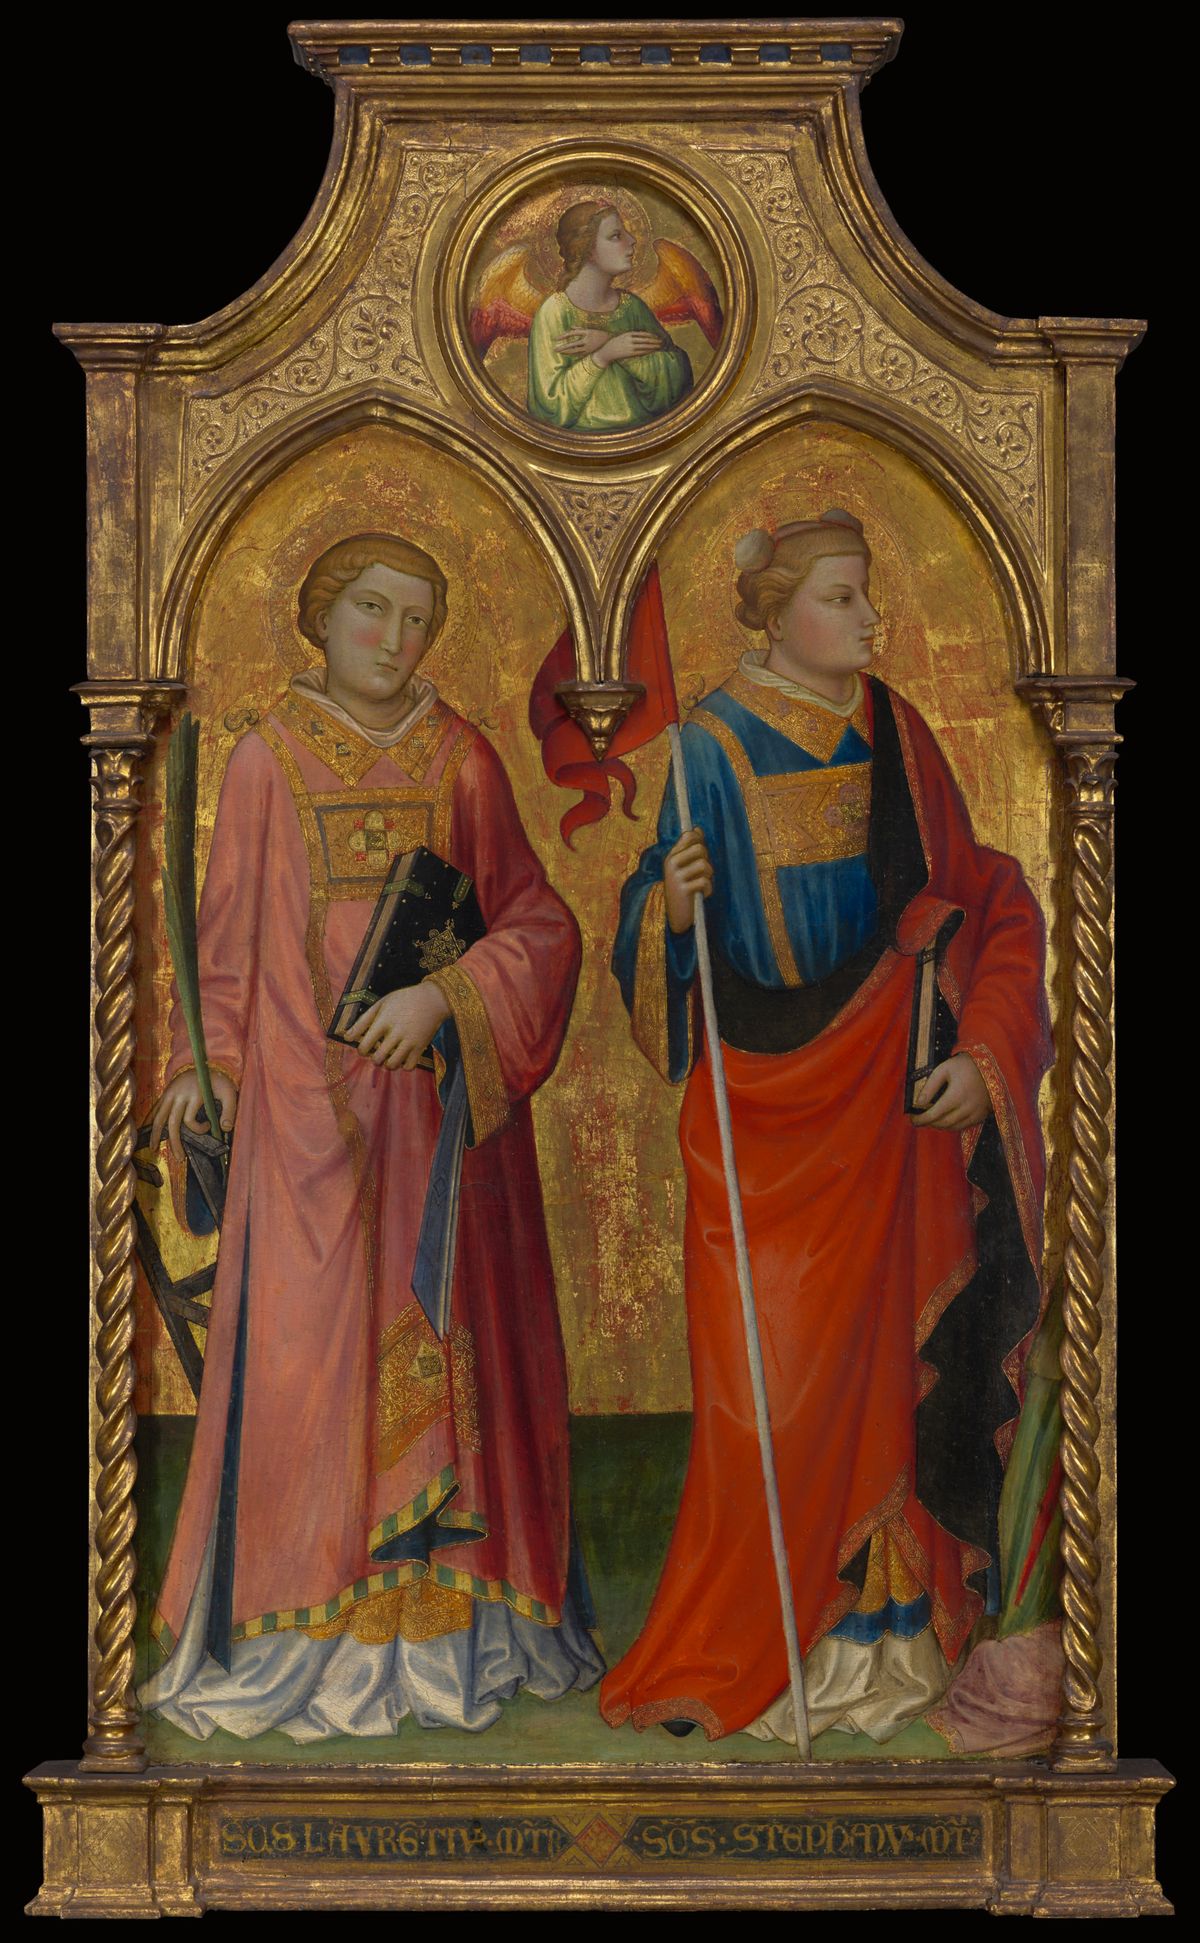 Saints Lawrence and Stephen by Mariotto di Nardo (1408) - Public Domain Catholic Painting